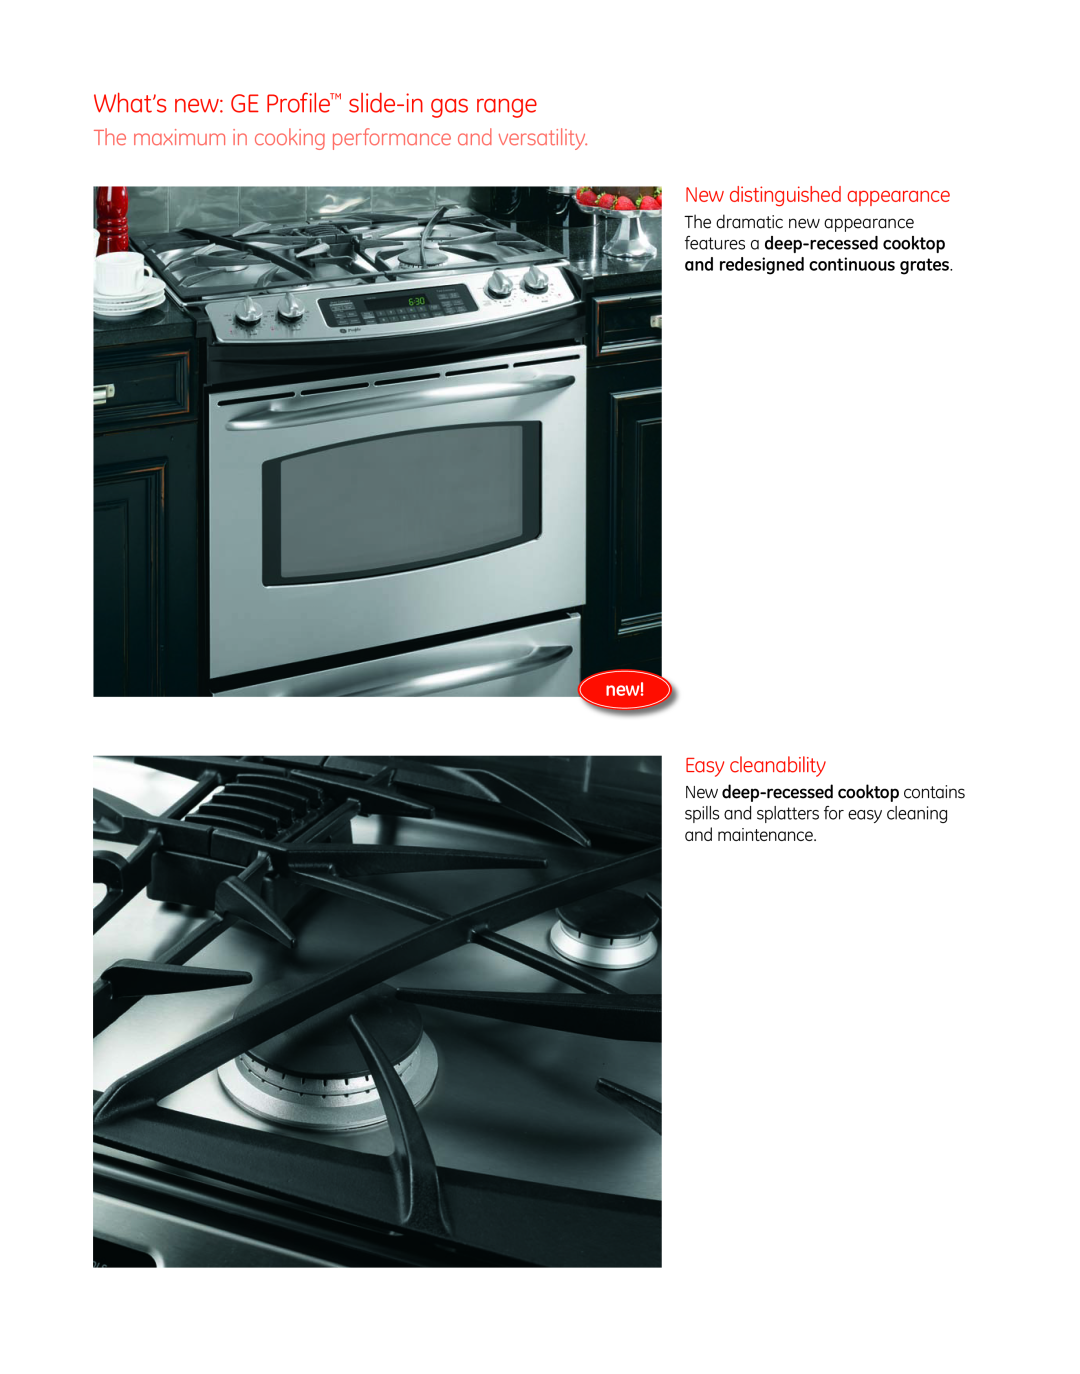 GE Monogram PGS975 manual What’s new GE Profile slide-in gas range, The maximum in cooking performance and versatility 